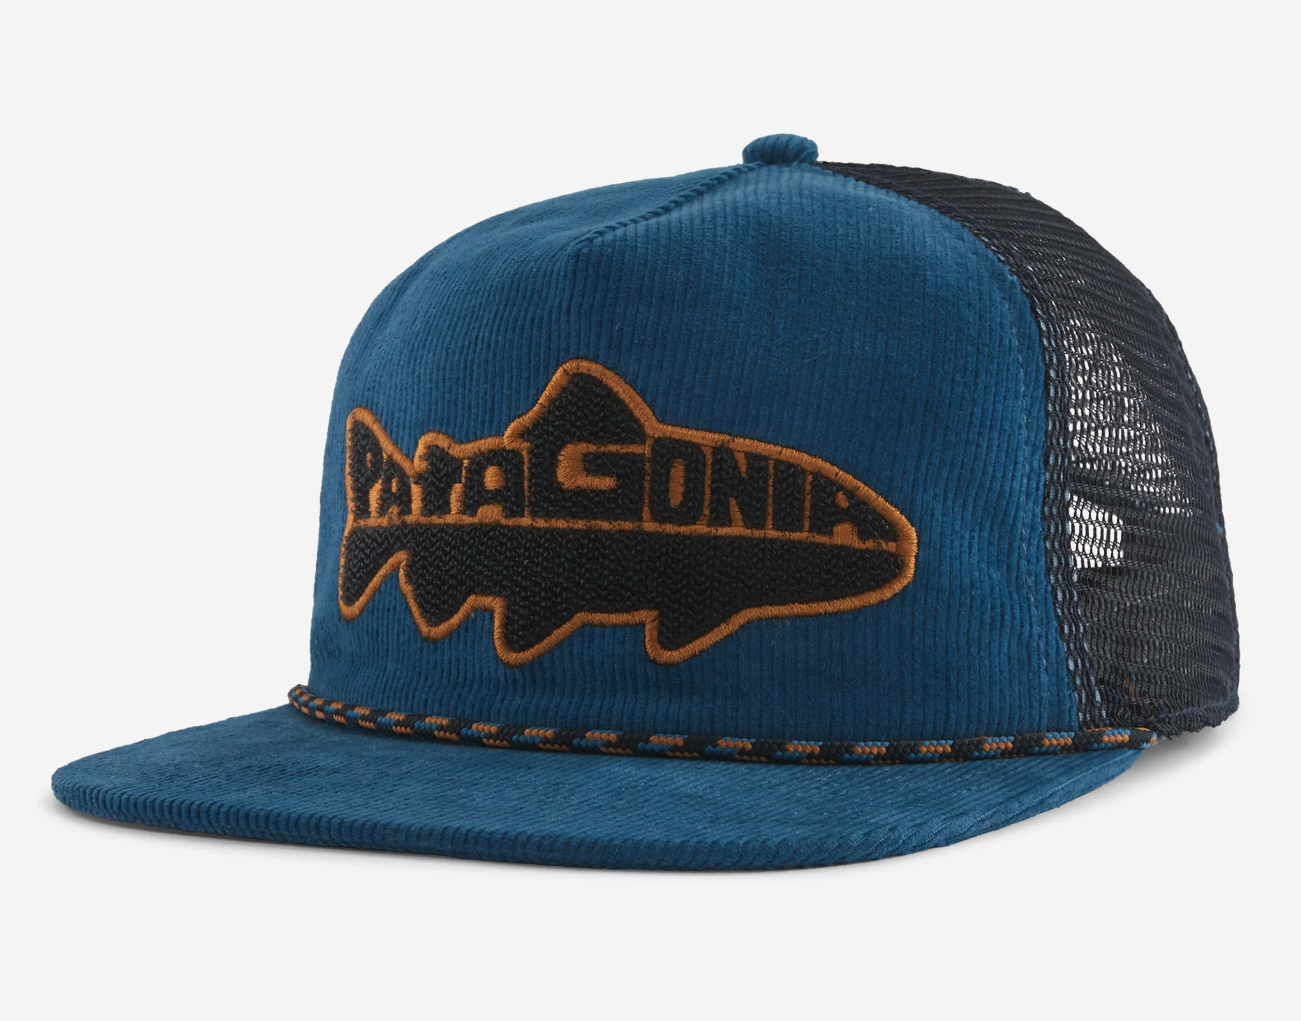 Patagonia Fly Catcher Hat For Sale Online WIBE